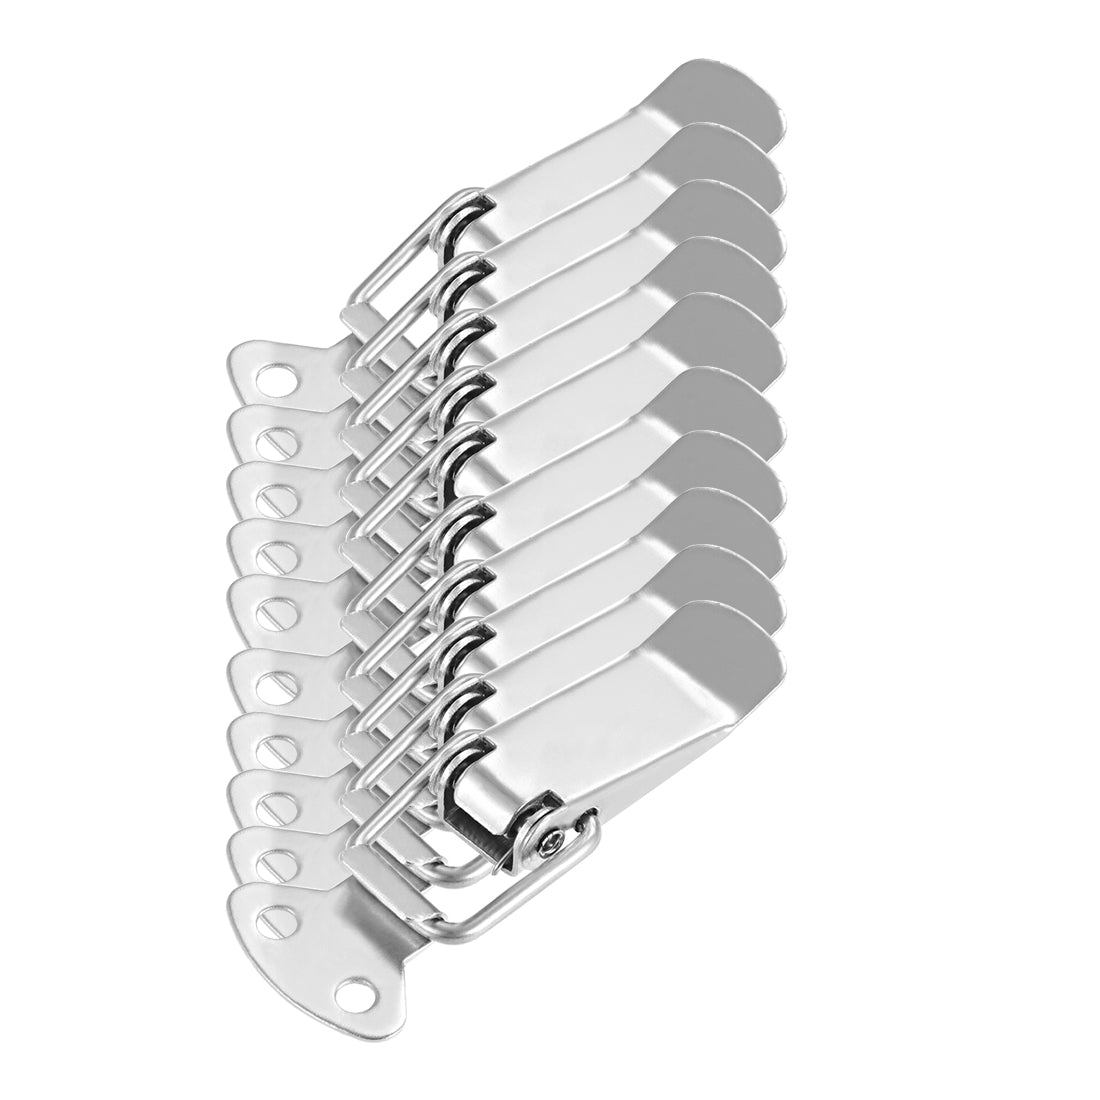 uxcell Uxcell 201 Stainless Steel Spring Loaded Toggle Case Box Chest Trunk Latch Catches Clamp Hasps 10 pcs, 72mm Overall Length